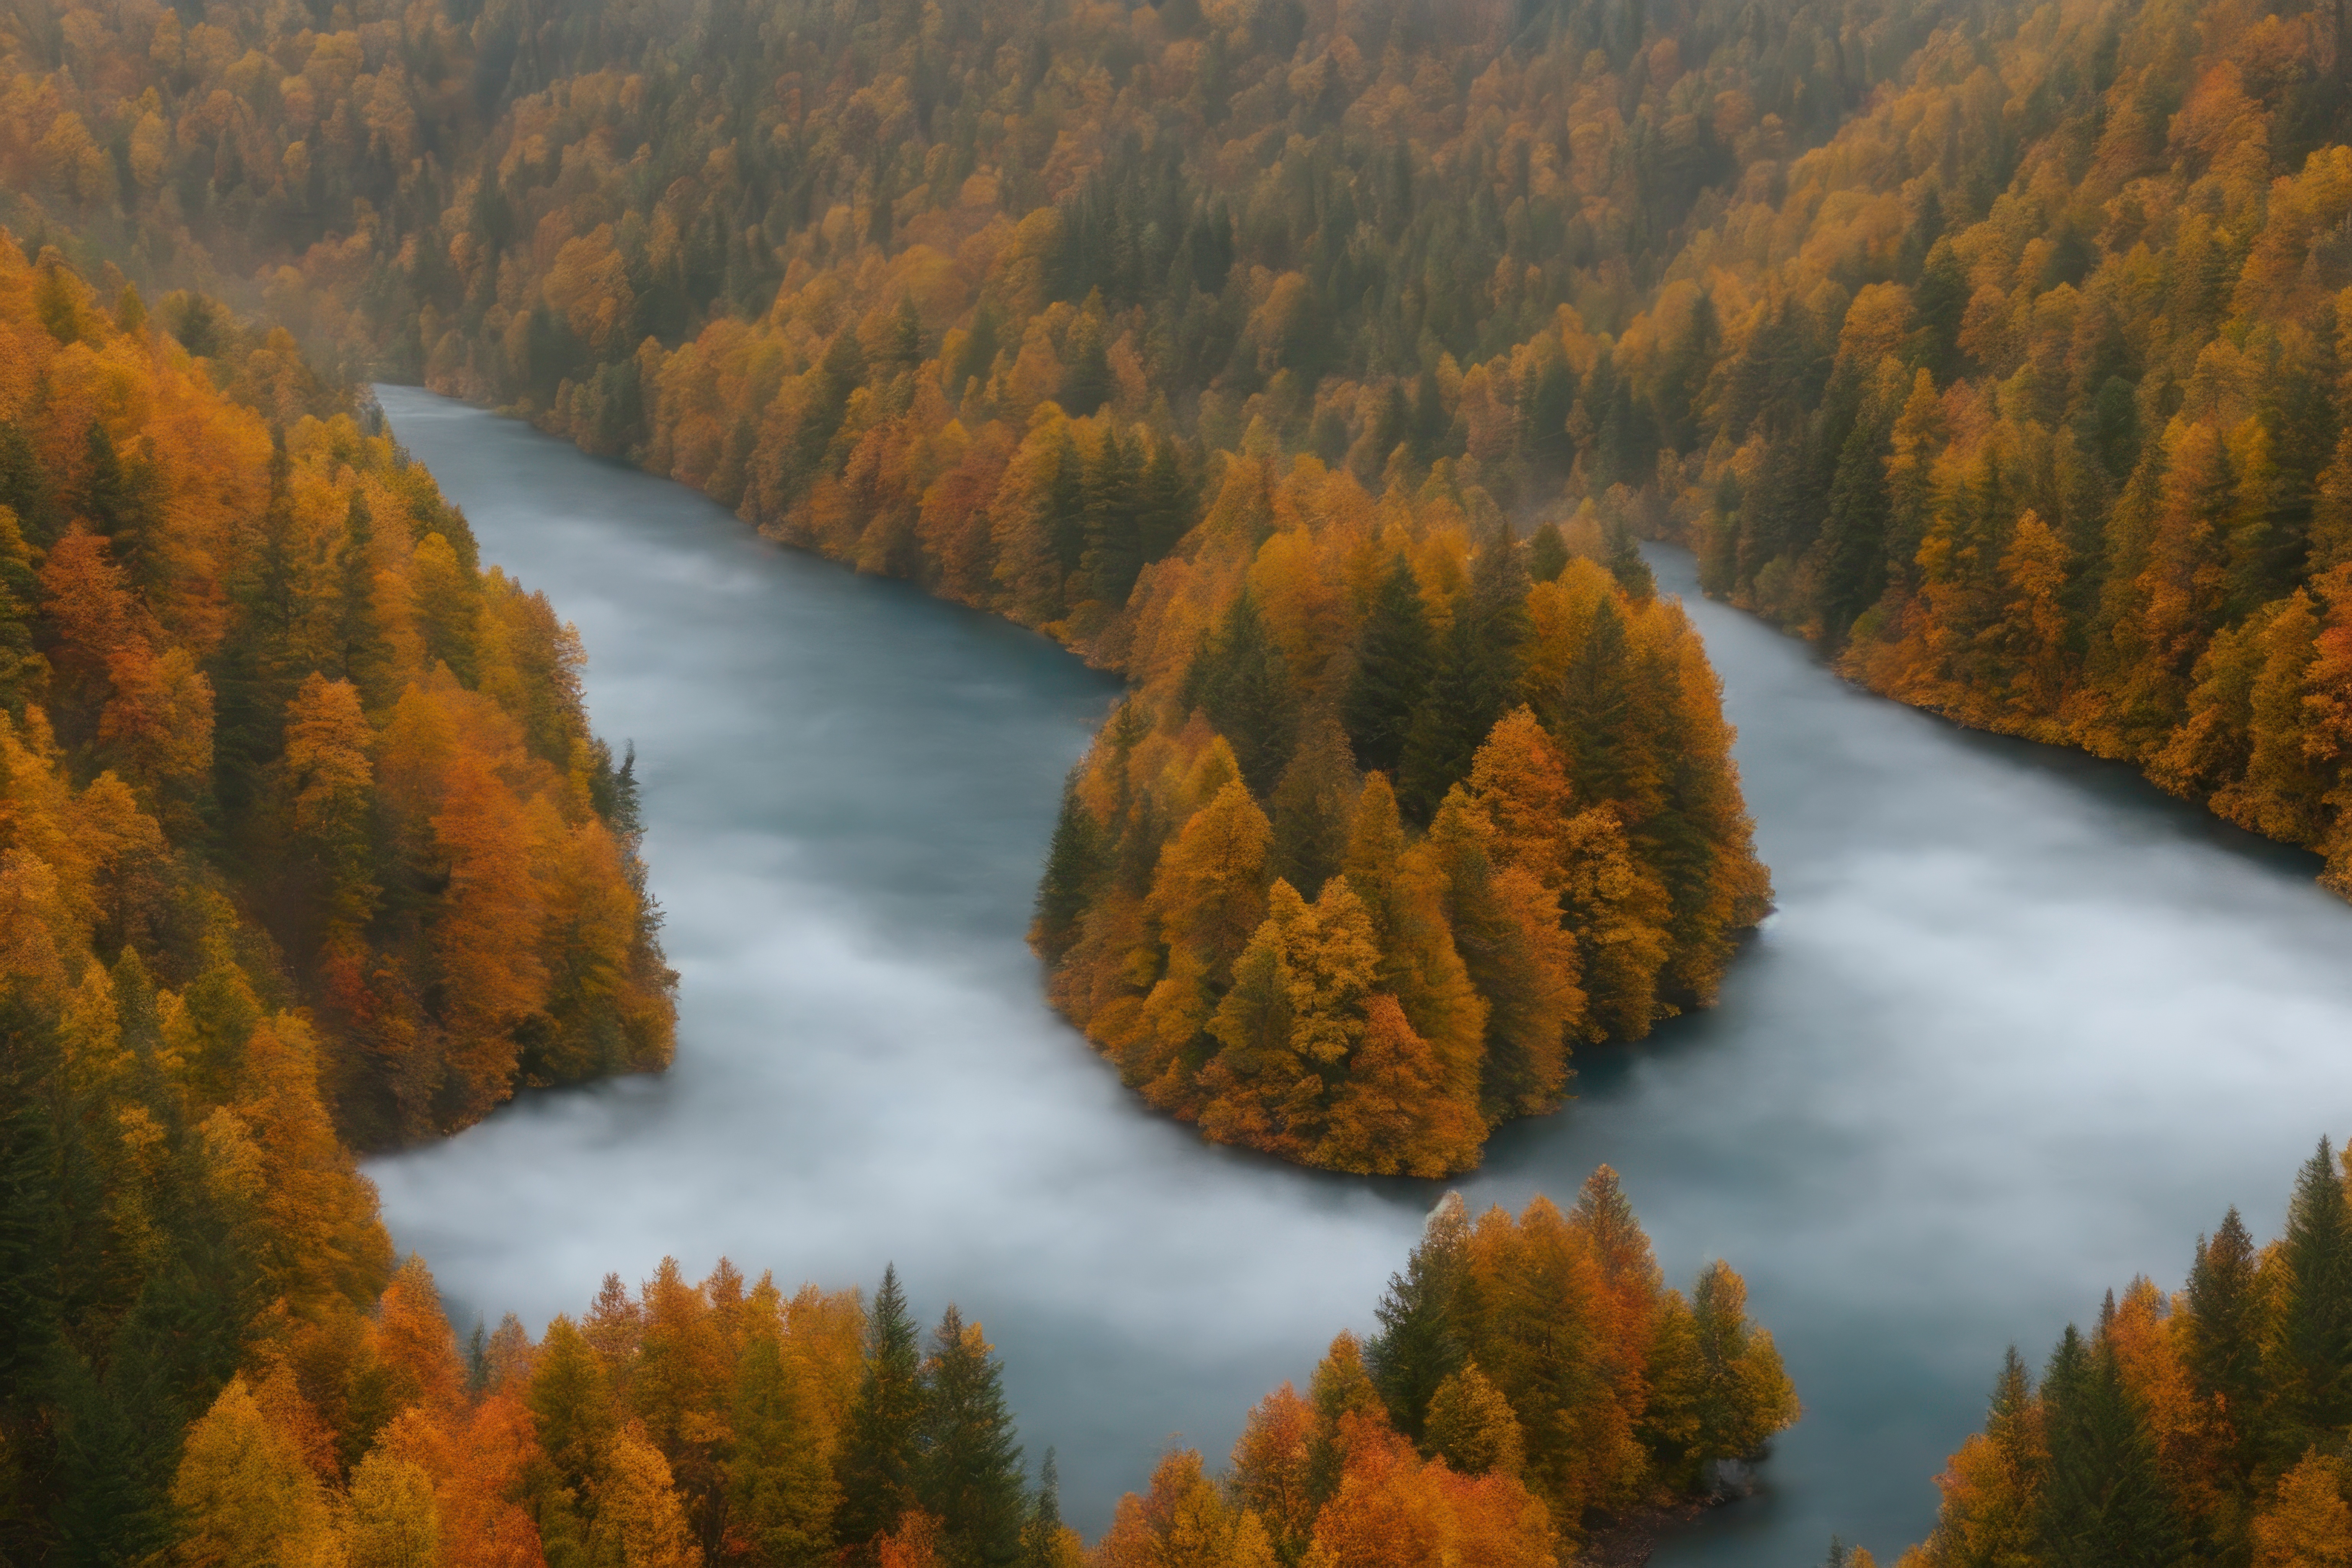 Autumn Harvest in the Polar Mountains: A Night of Rivers, Hills, Clouds, and Foliage